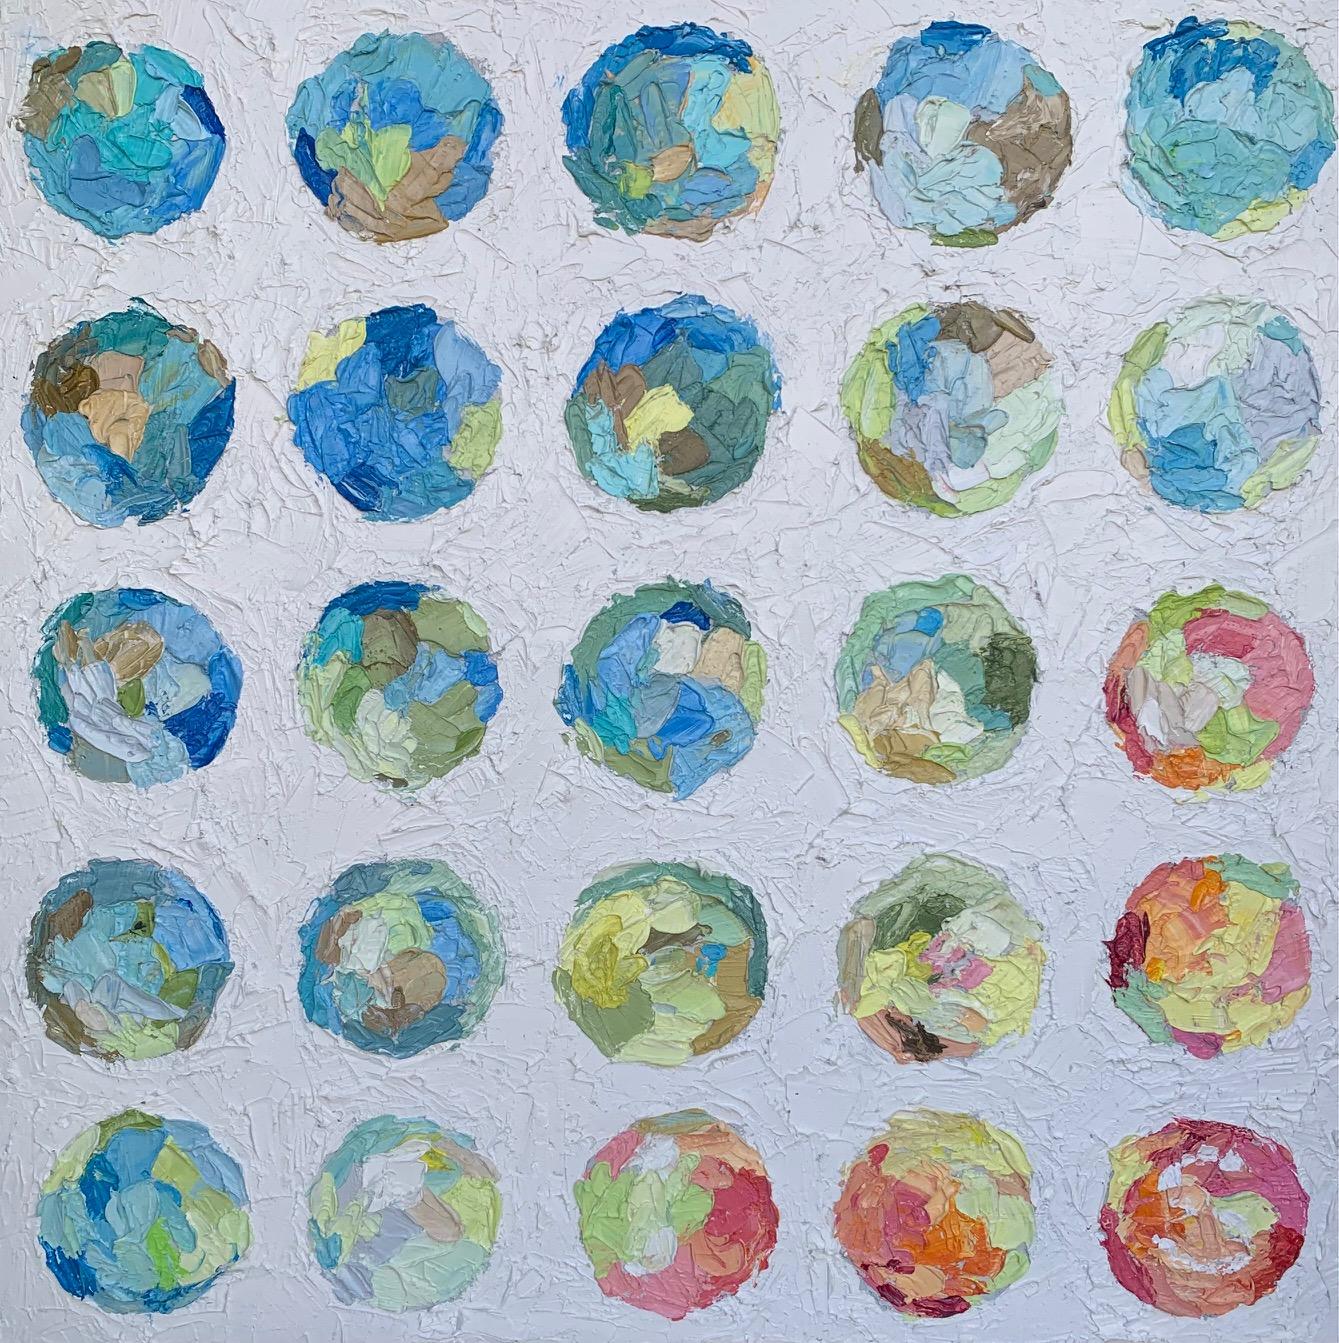 "Summer Days" by Sveta Hessler is a mesmerizing 30" x 30" oil on canvas that captures the essence of sunlit afternoons and the gentle warmth of the season. This contemporary abstract piece invites viewers into a world of vibrant circles, each